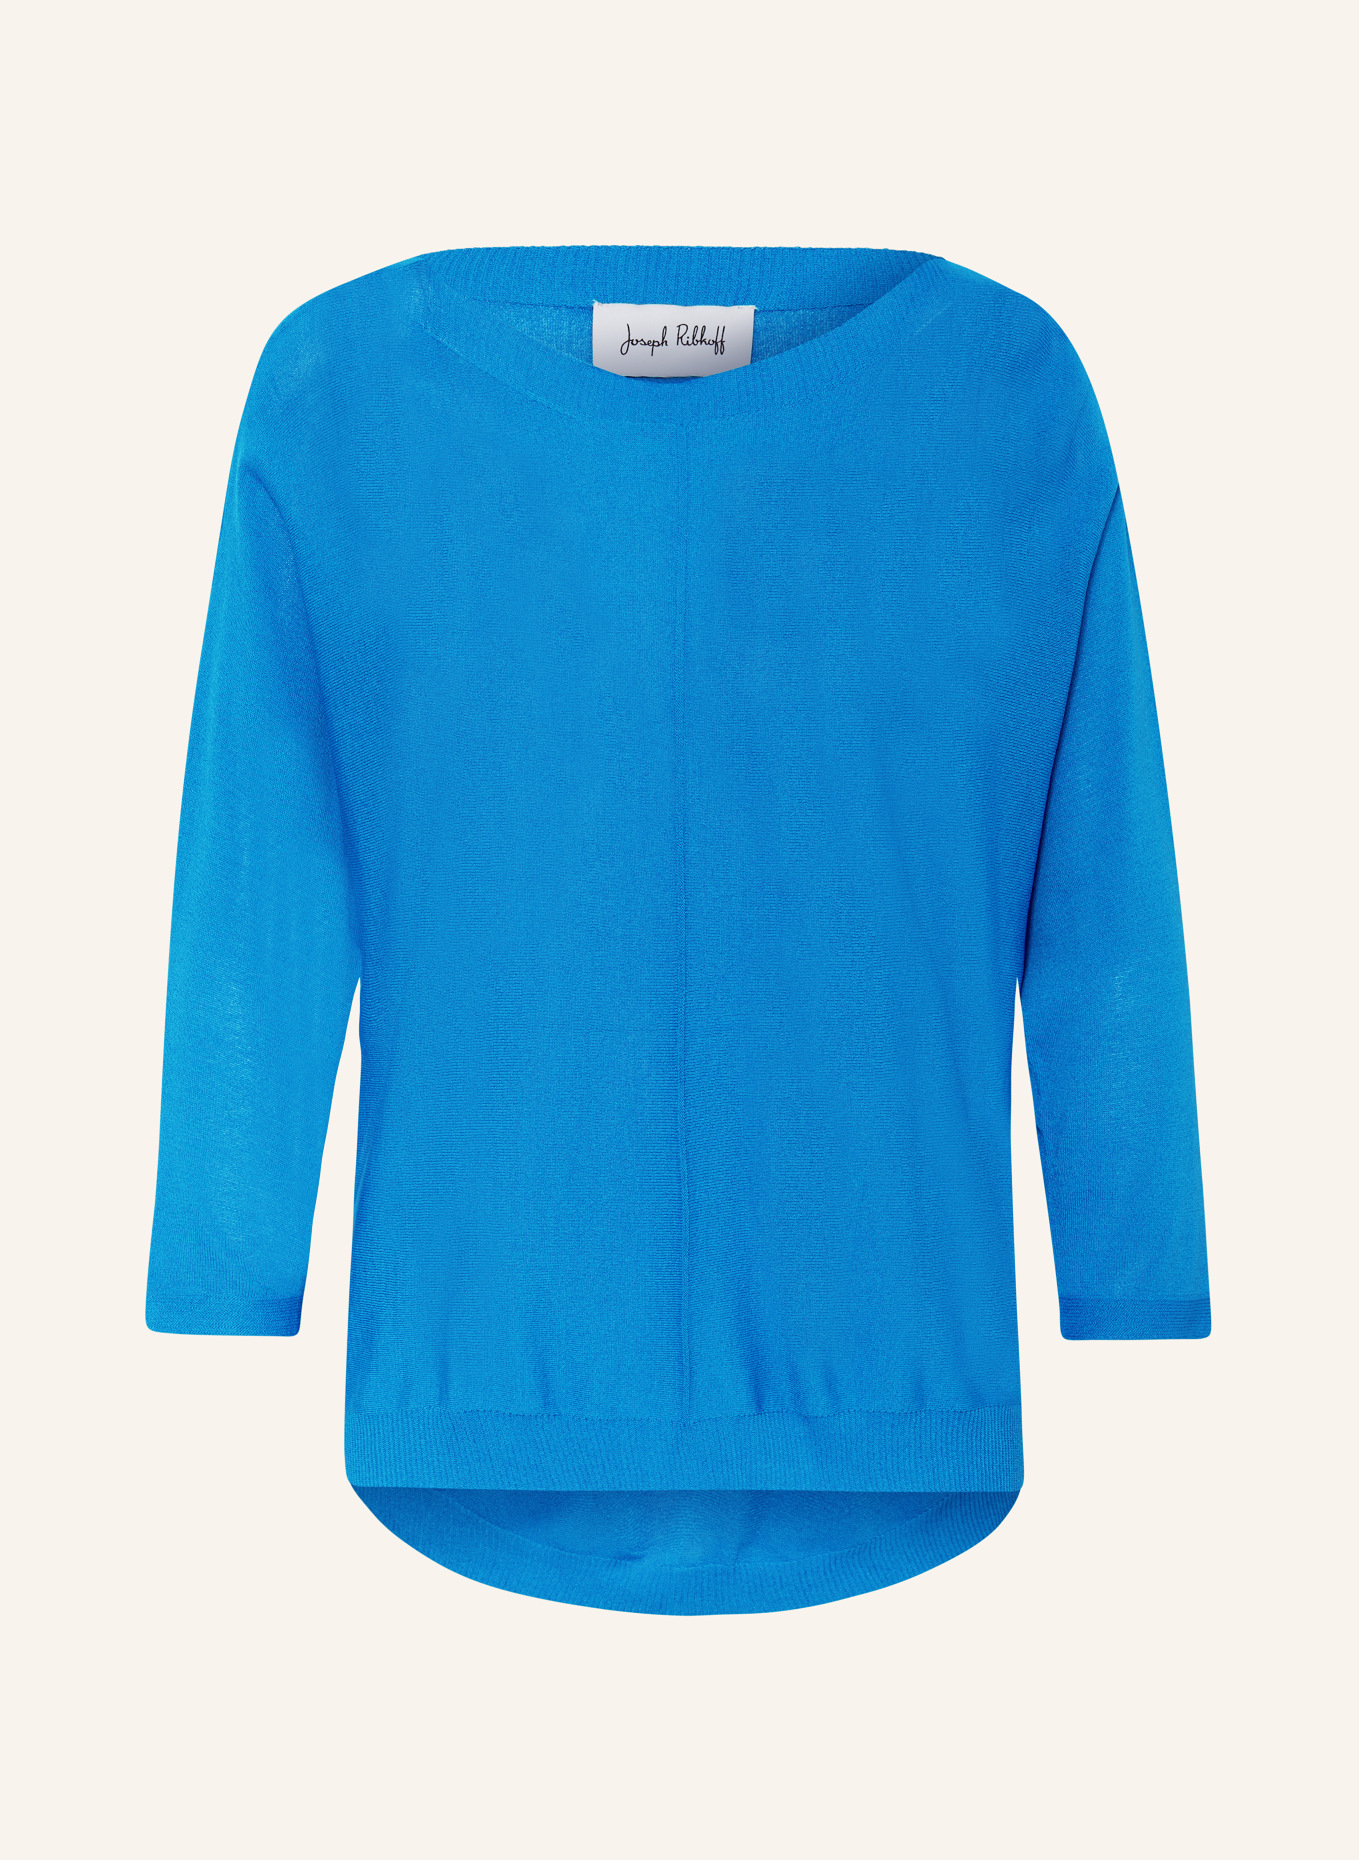 Joseph Ribkoff Sweater with 3/4 sleeves, Color: BLUE (Image 1)